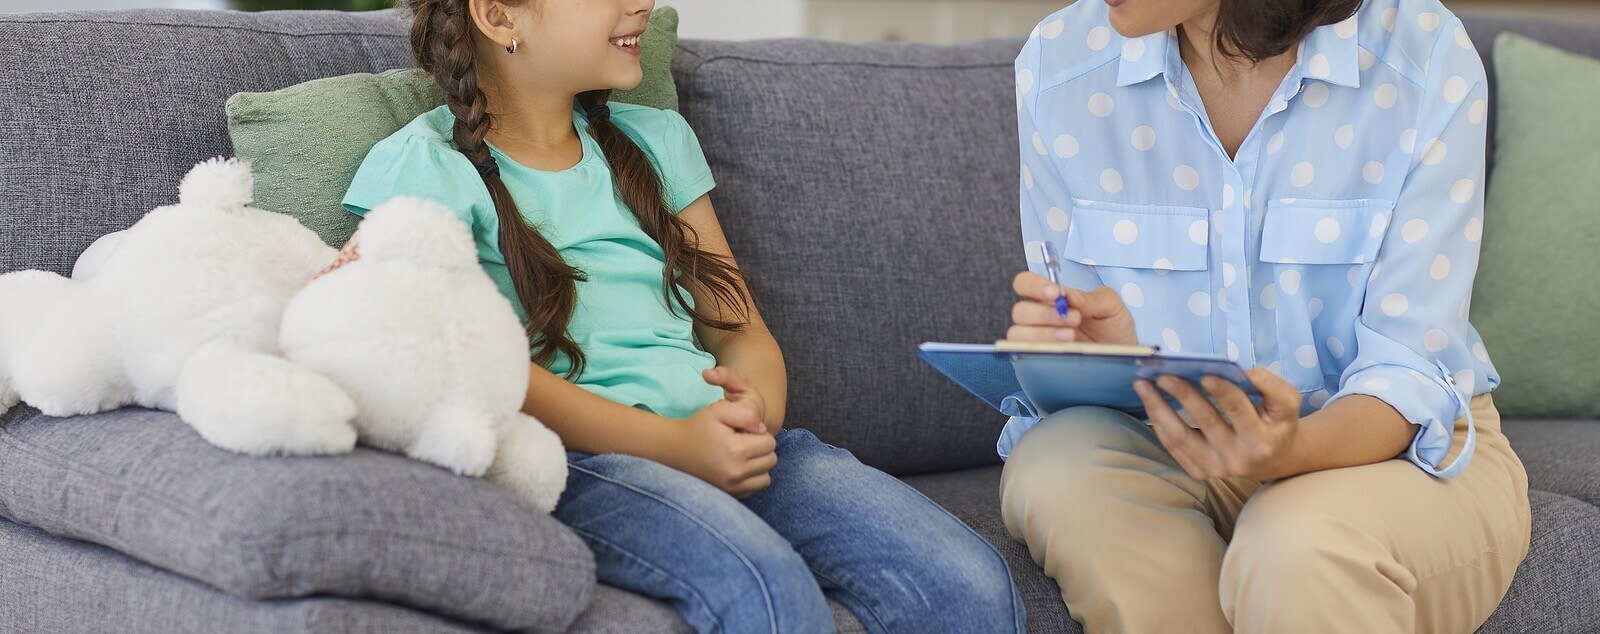 Photo of a young girl sitting on a couch smiling and speaking with an adult woman who is holding a clipboard. Uncover what might be causing your child's learning disability with the help of child neuropsych testing in Saint Petersburg, FL.